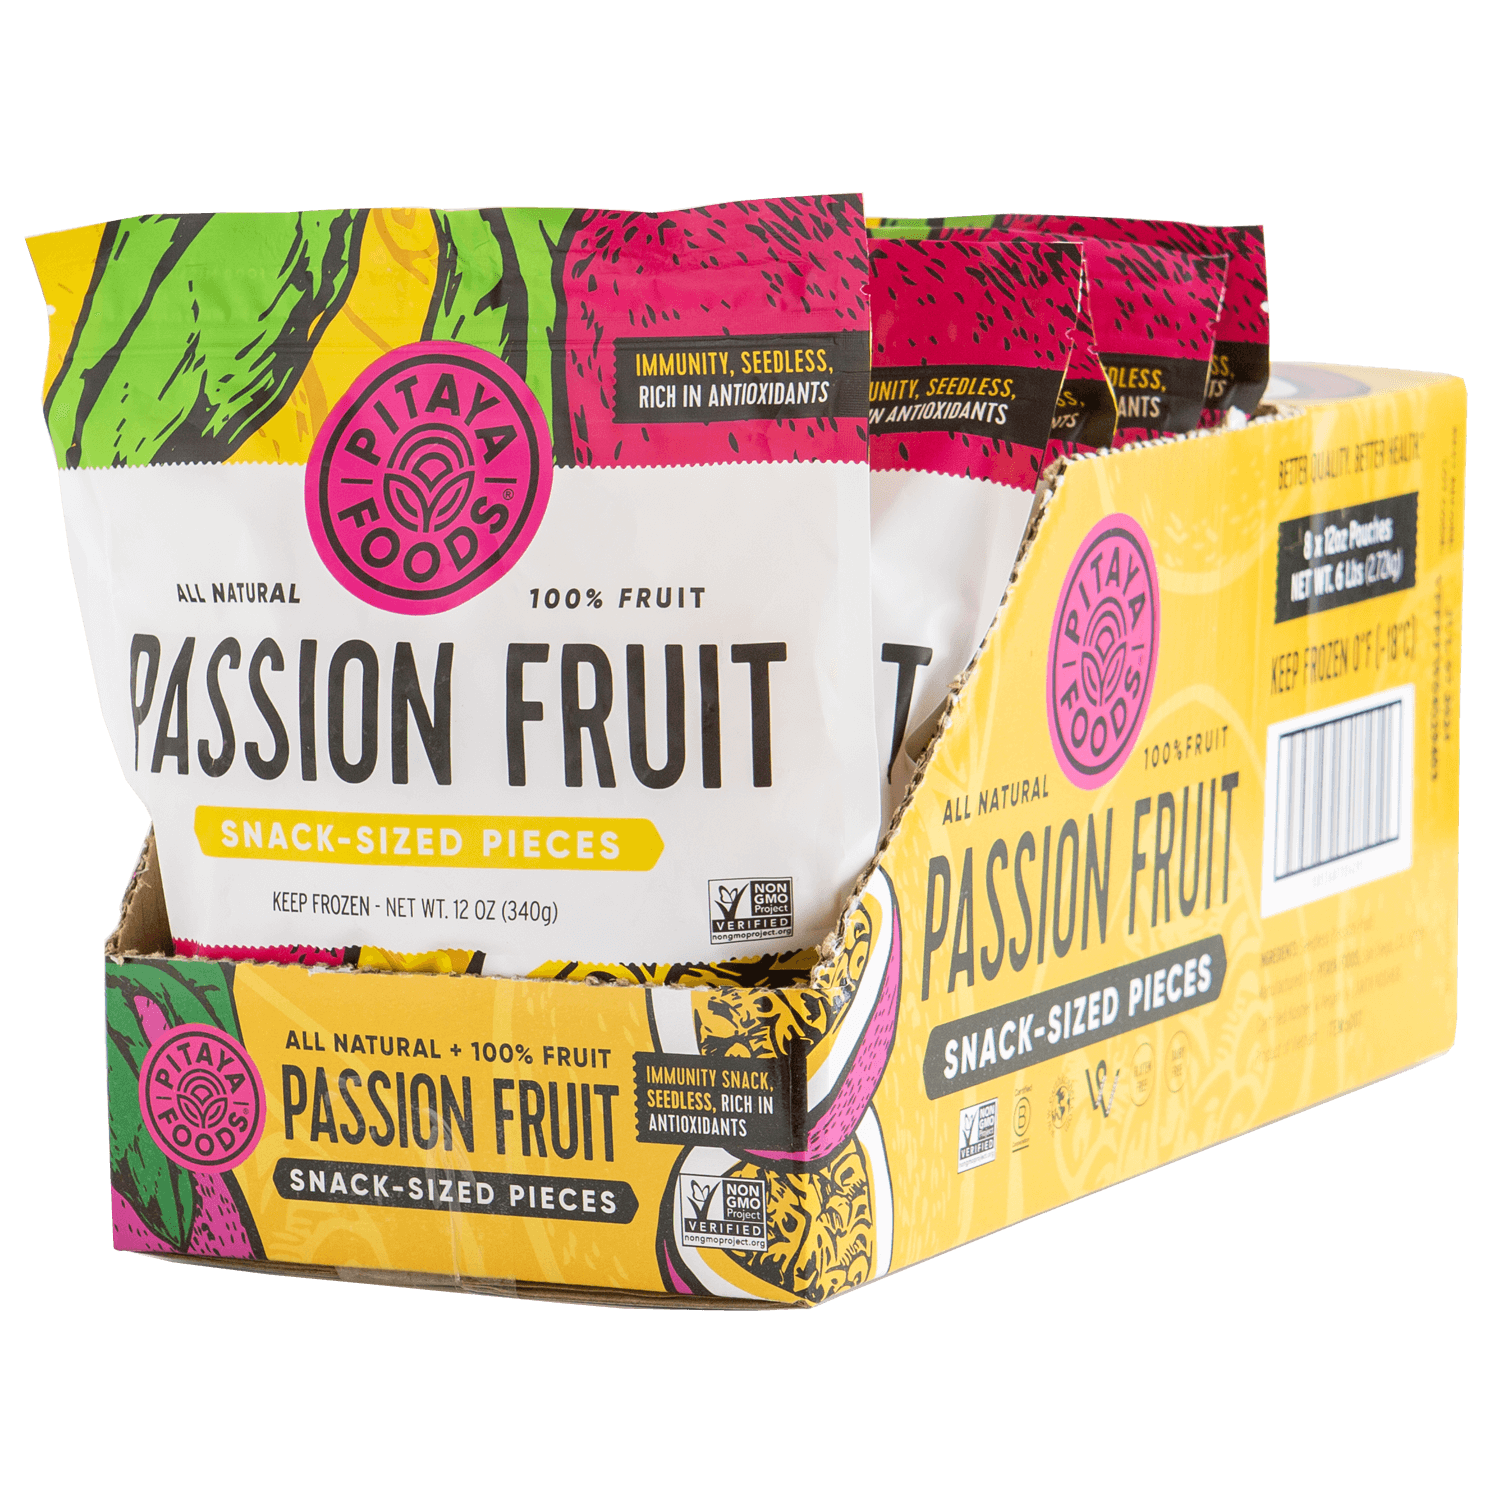 Pitaya Foods Passion Fruit Snack-Sized Pieces Case Size